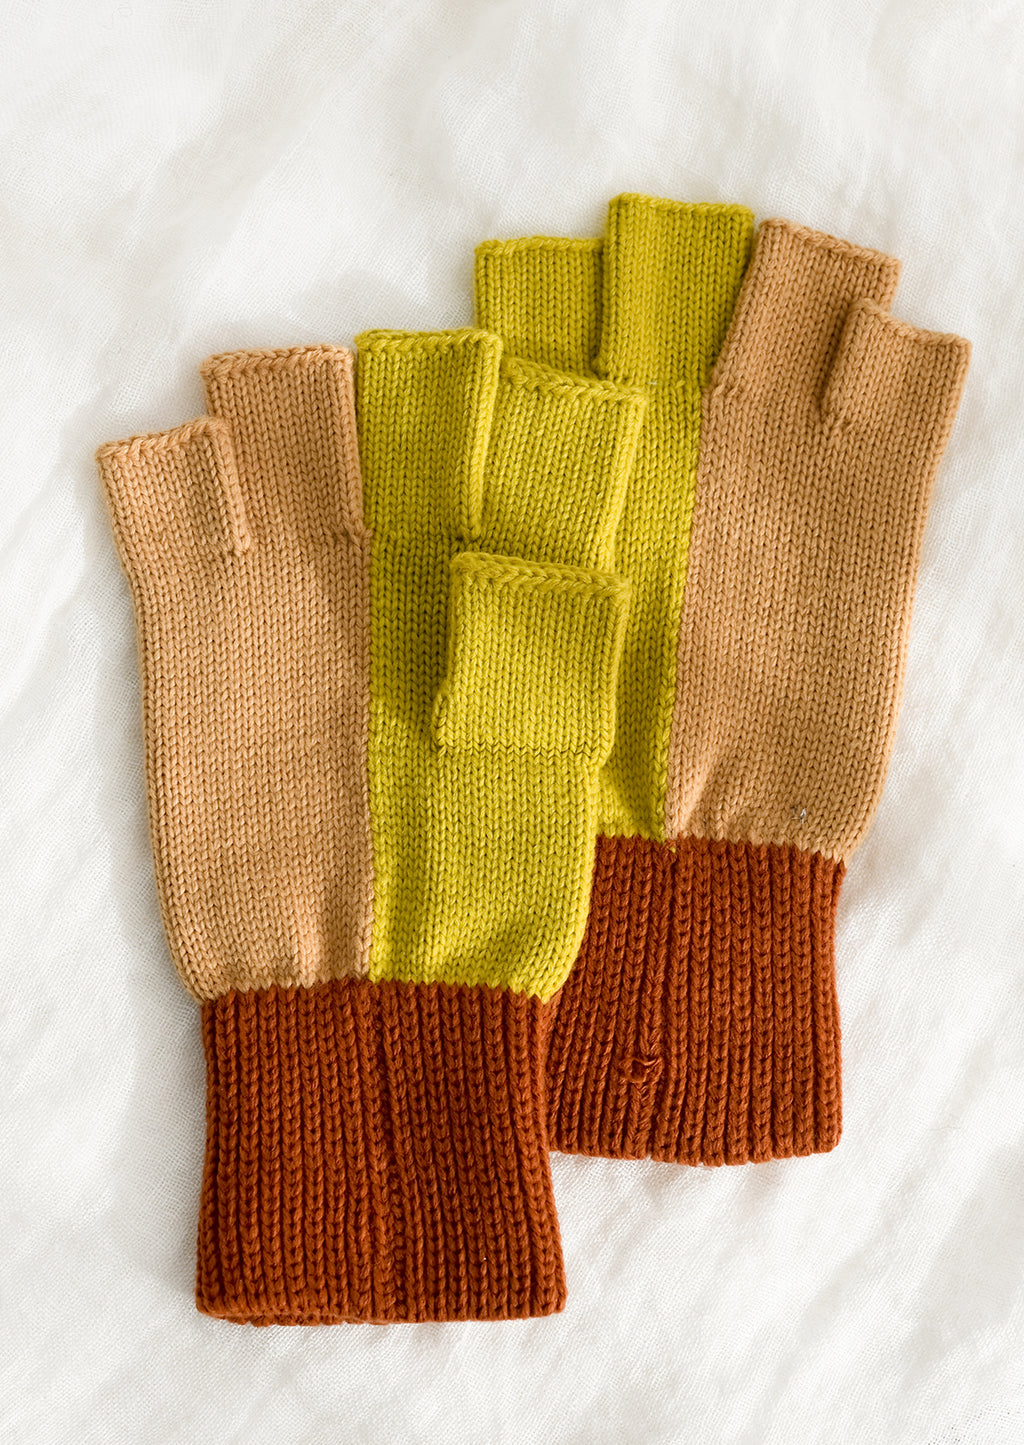 Citrine Colorblock: A pair of knit fingerless gloves in terracotta, peach and citrine colorblock.